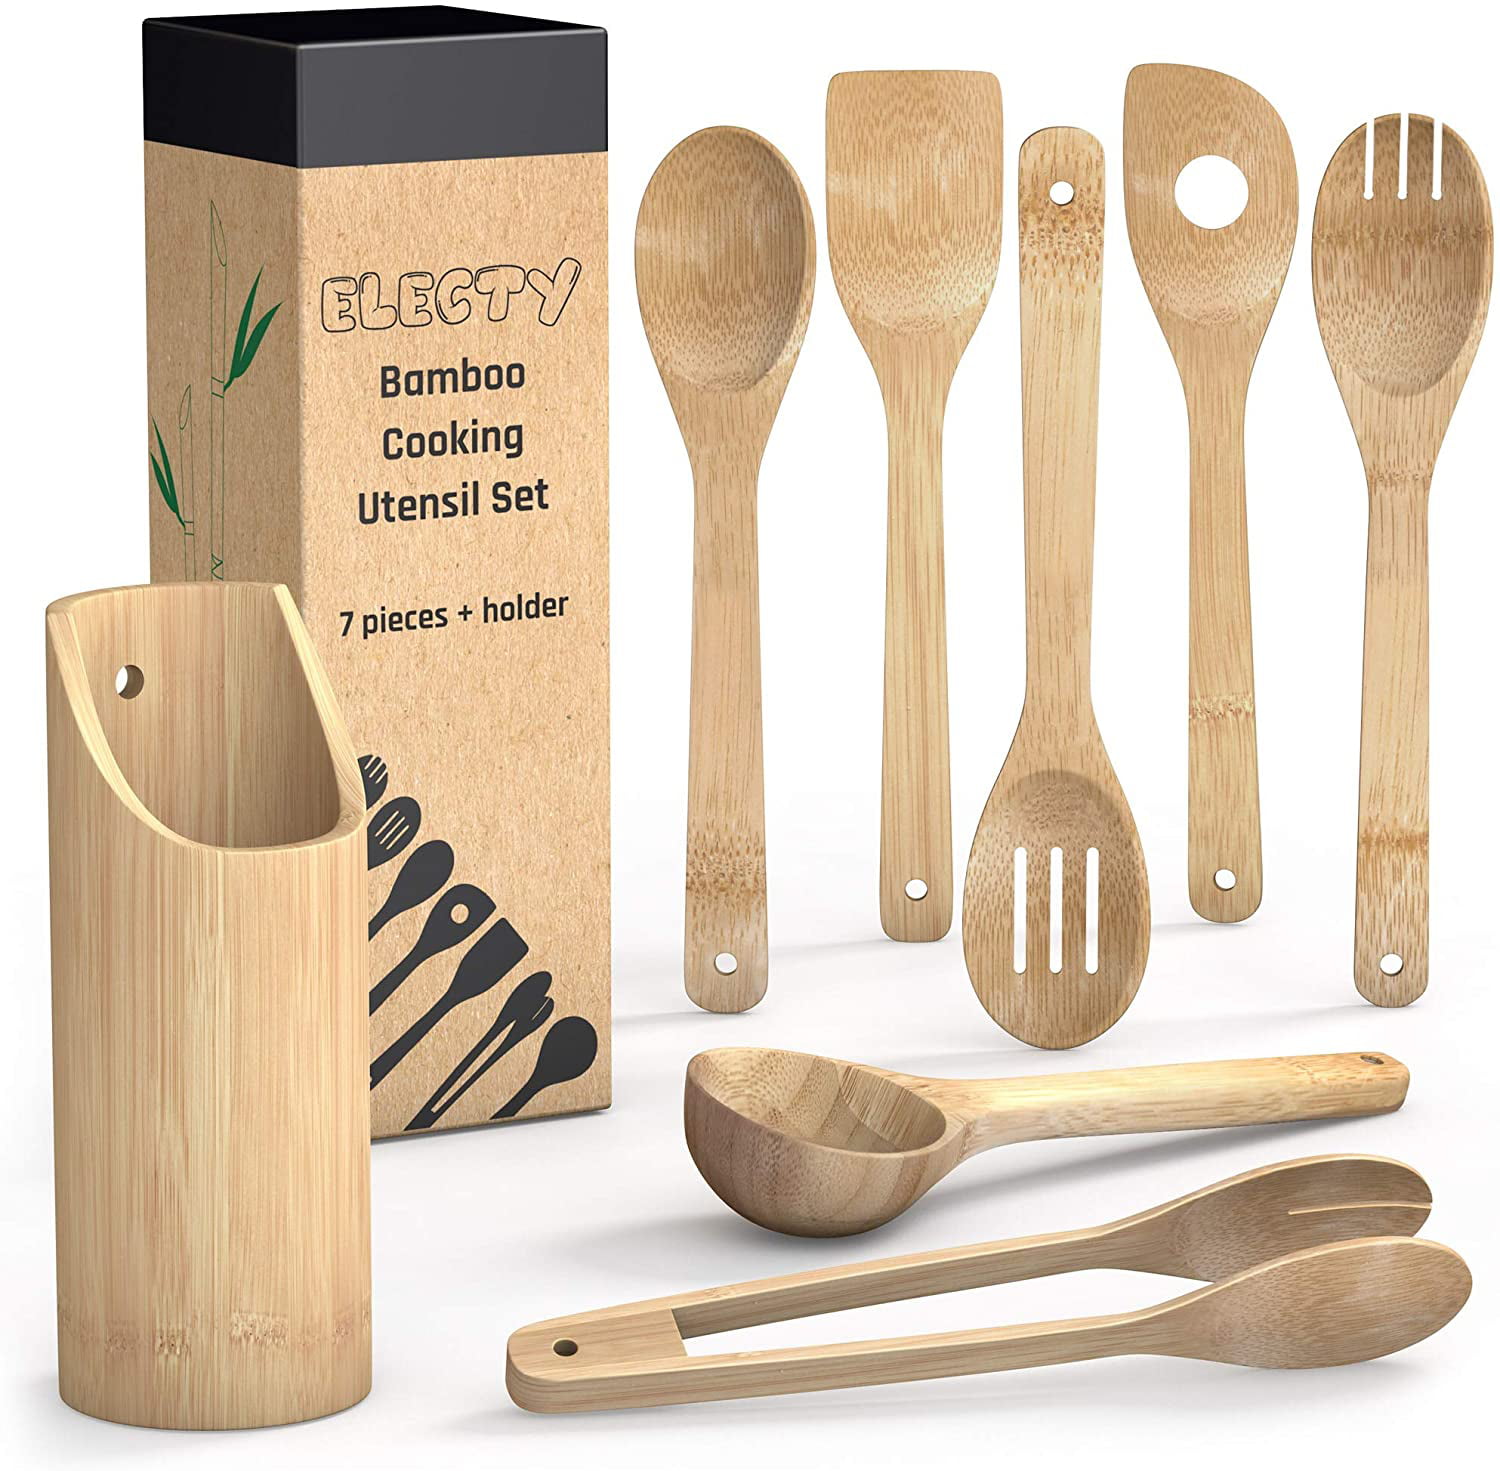 Bamboo Cooking Utensil Set Holder Cutlery Kitchen Wooden Spatula Slotted Turner 